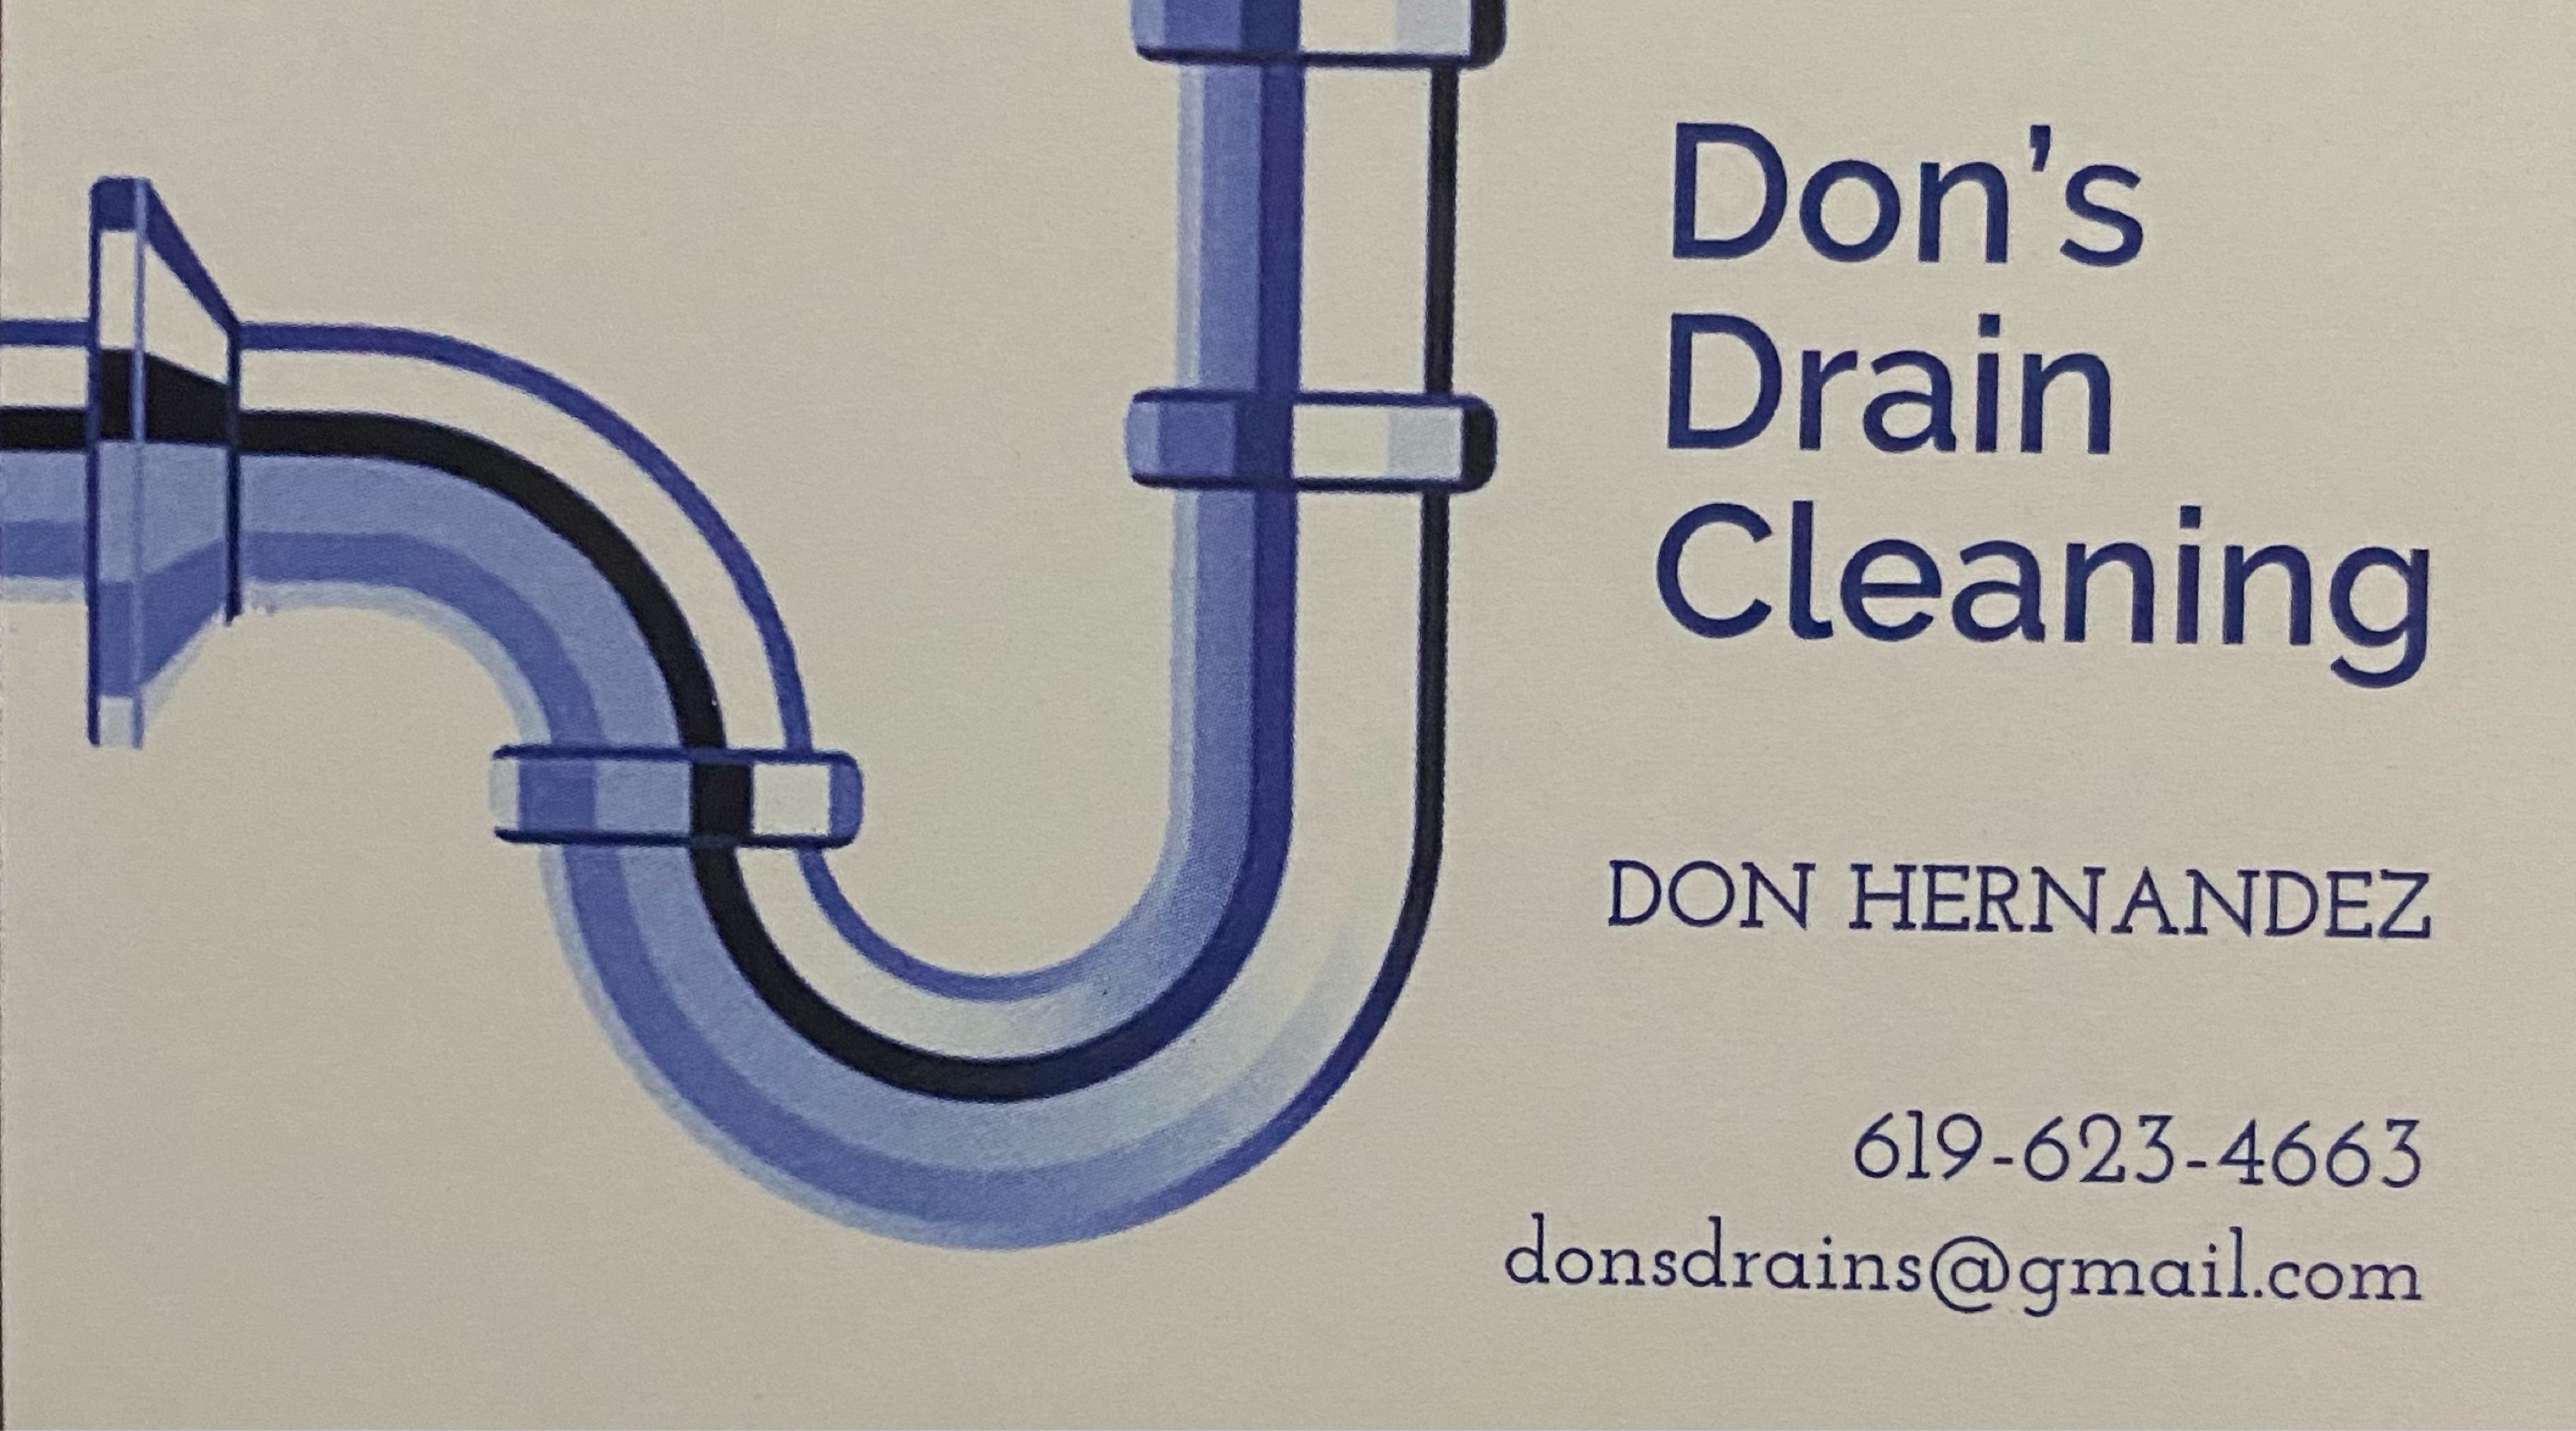 Don's Drain Cleaning -  Unlicensed Contractor Logo